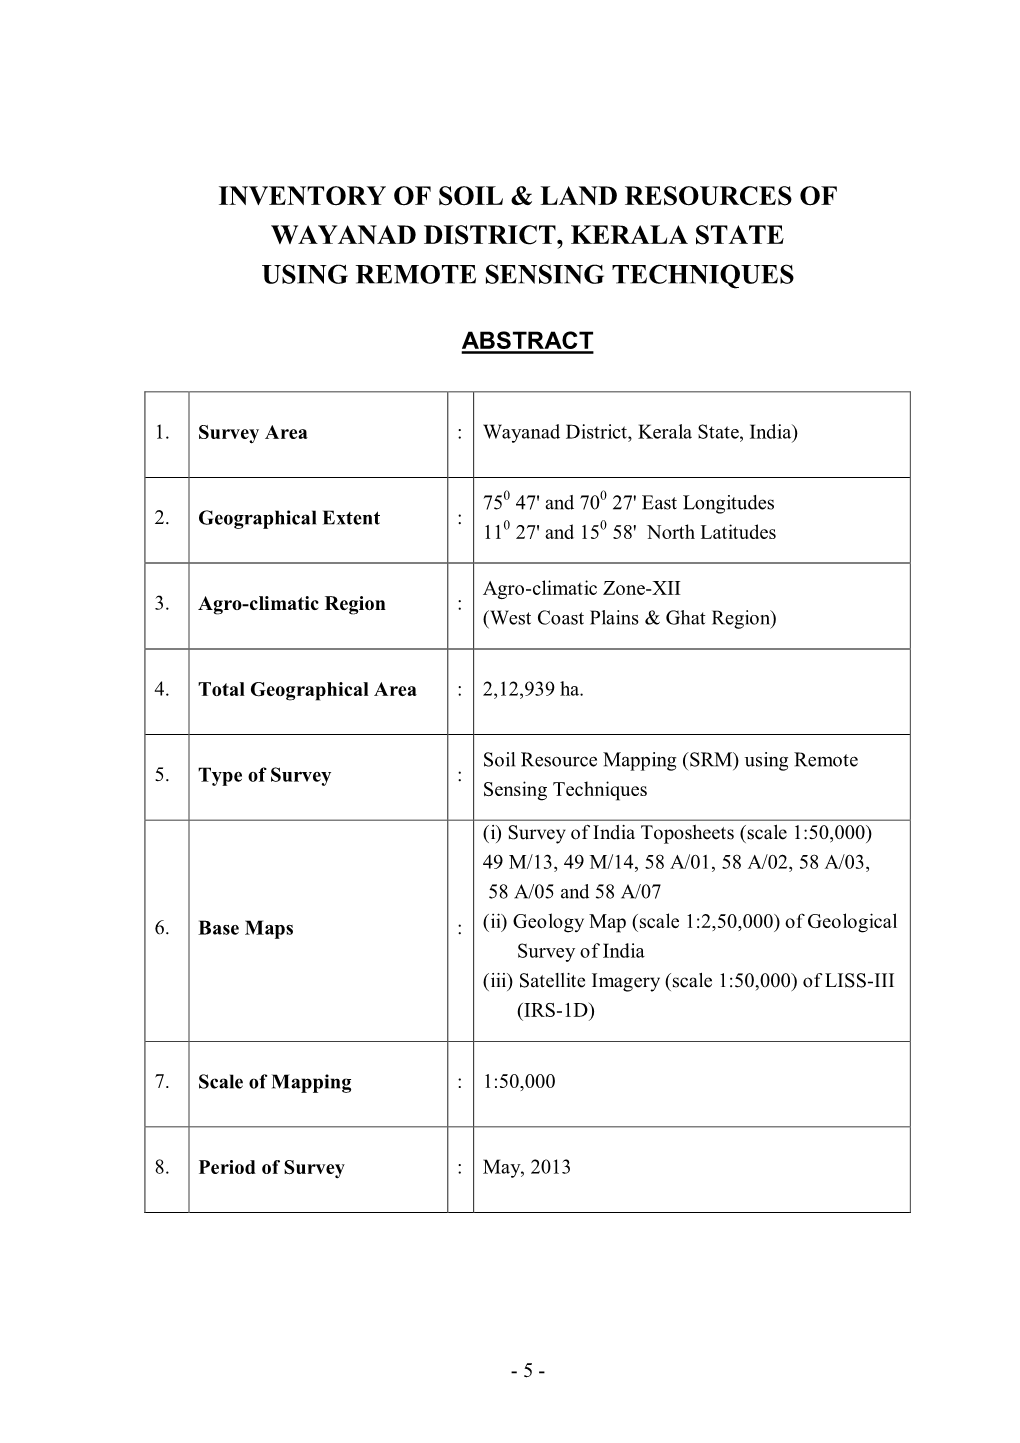 Inventory of Soil & Land Resources of Wayanad District, Kerala State Using